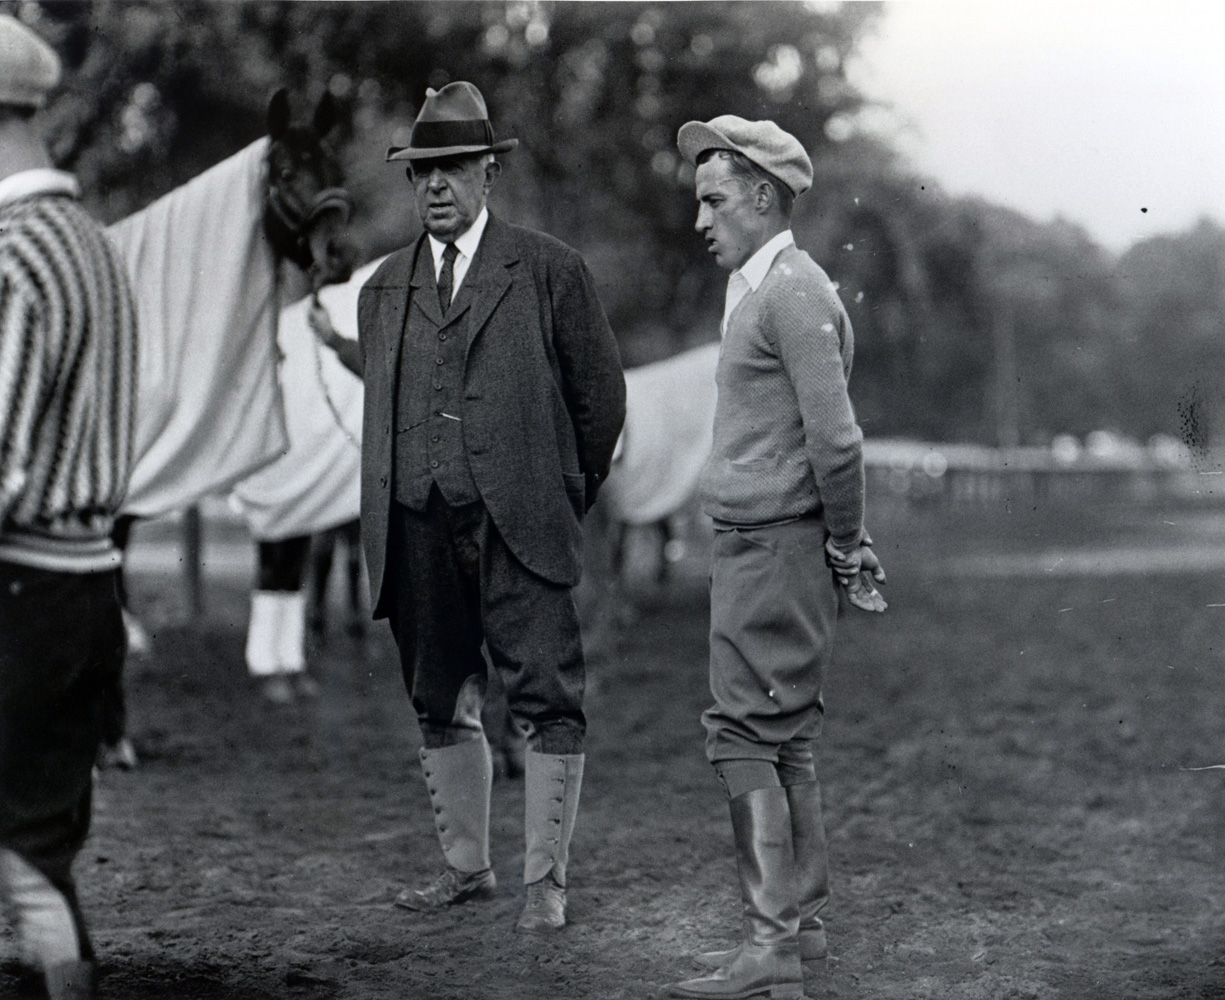 Trainer Andrew Jack Joyner and jockey J. Linus McAtee in the paddock (Keeneland Library Cook Collection)